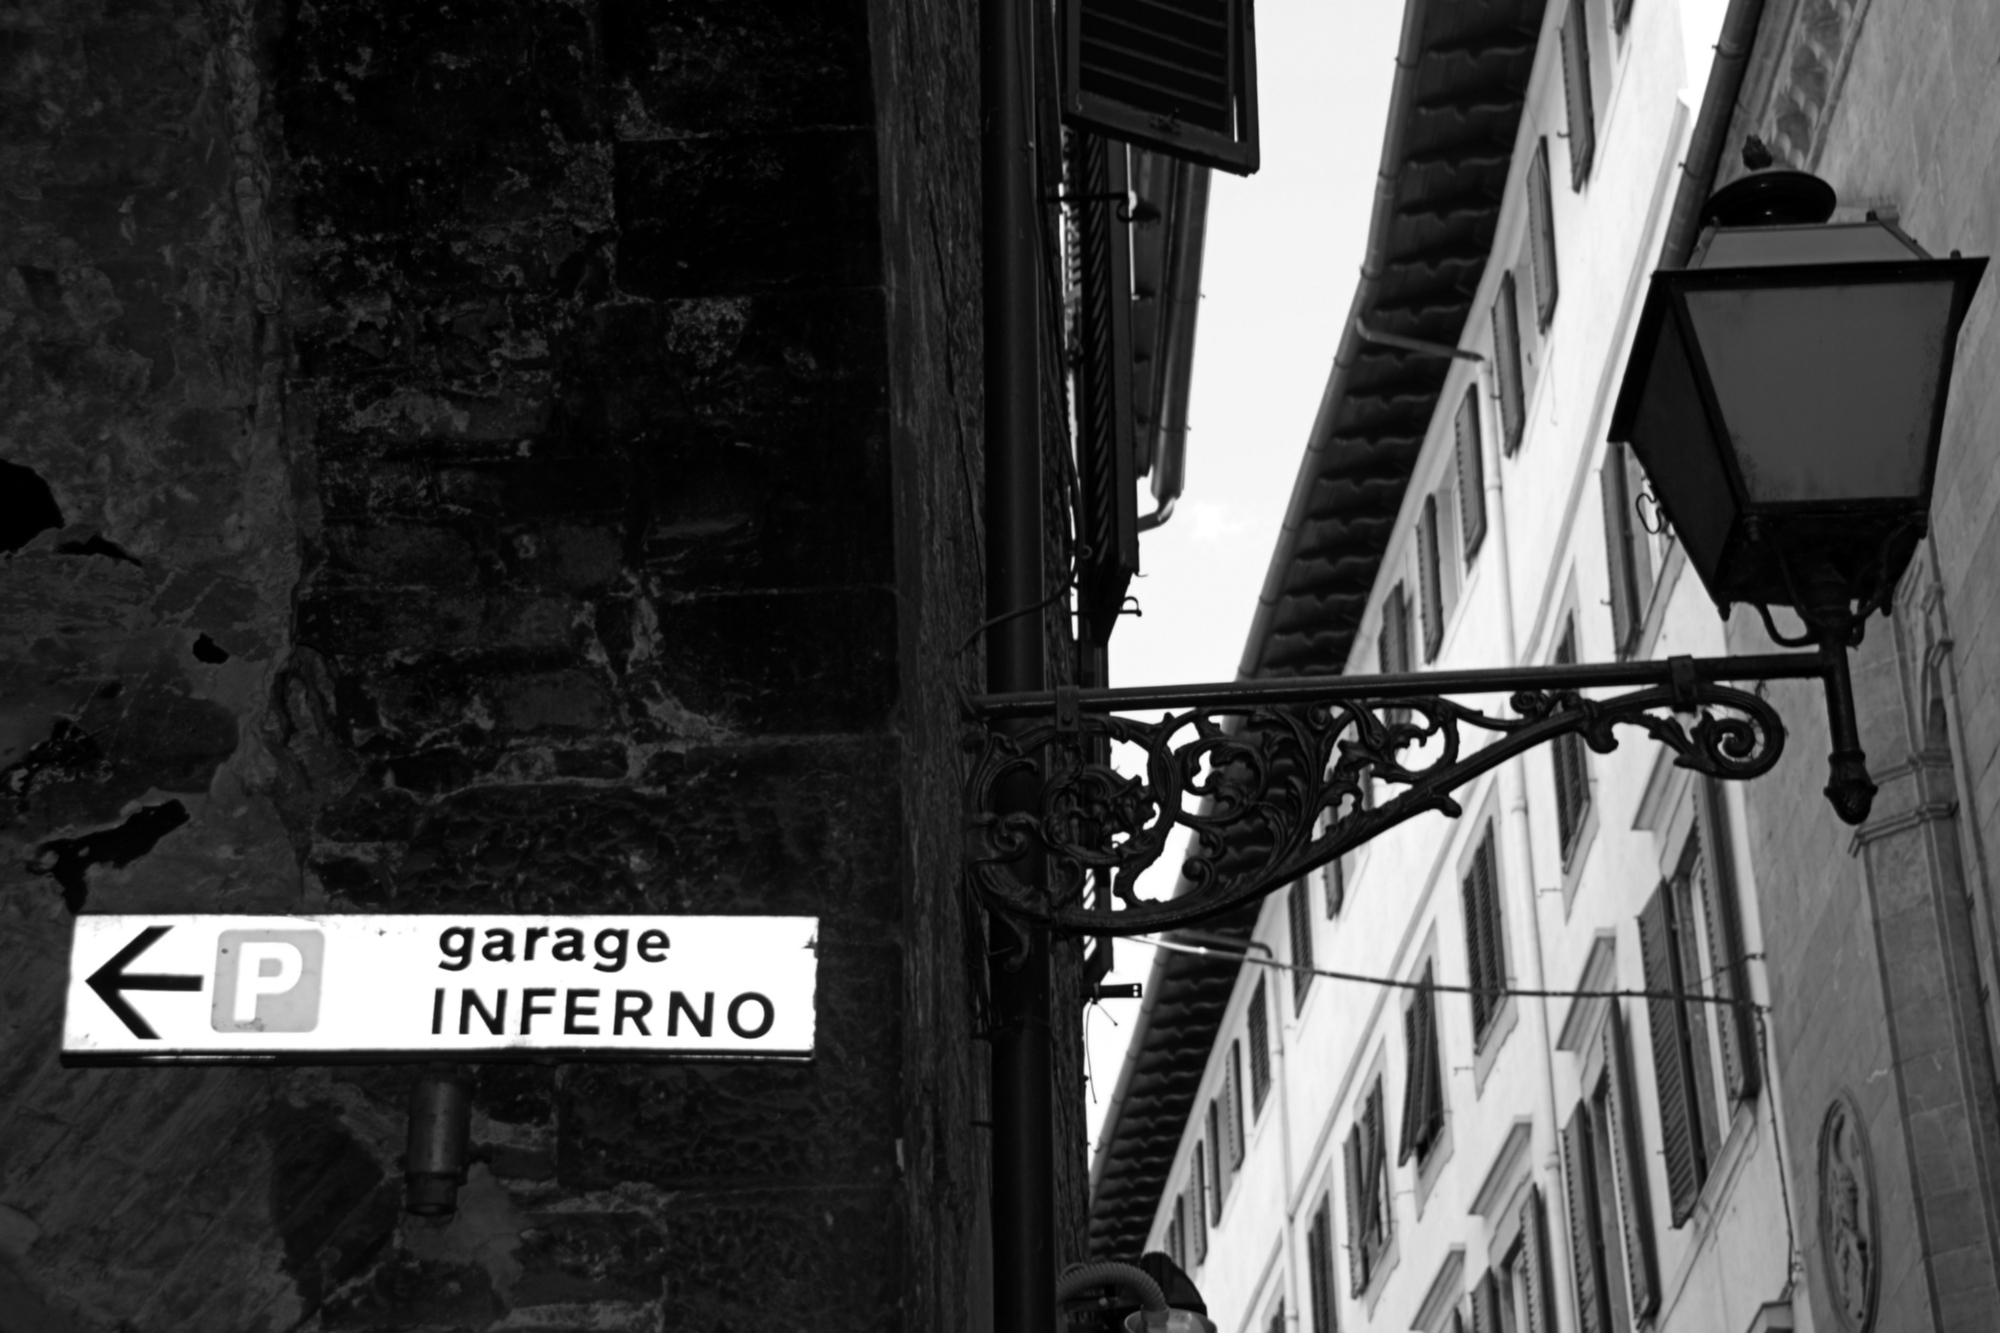 Aptly-named parking garage in via dell'Inferno